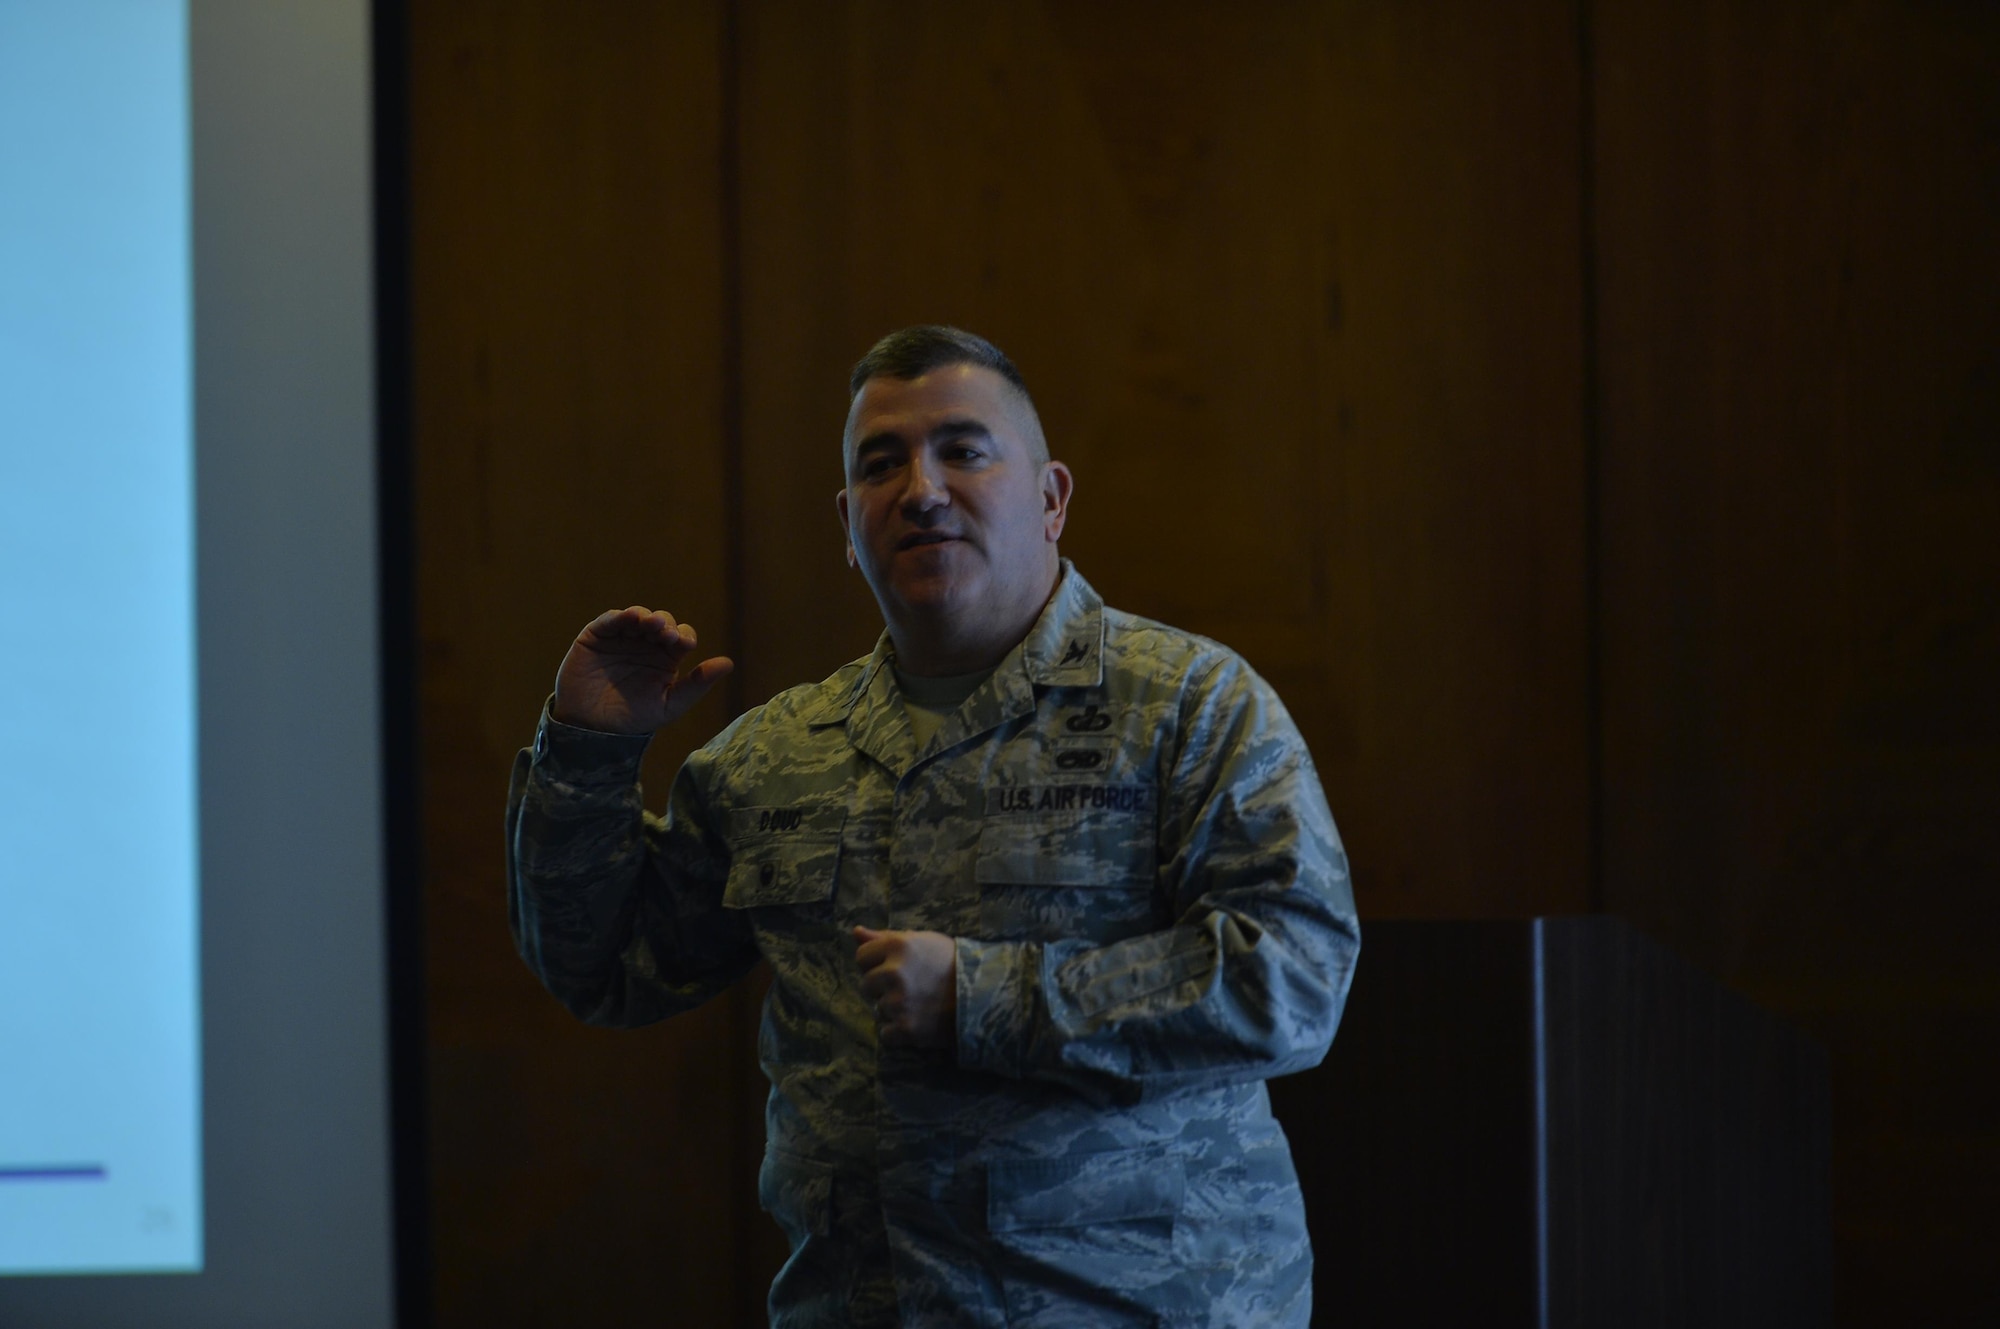 Col. Ronnie Doud, Air Force Installation Contracting Agency Europe director, speaks during a meeting for contracting representatives on Ramstein Air Base, Germany, Jan. 24, 2017. Participants in the meeting discussed ways to efficiently acquire supplies and material for U.S. forces in Europe. (U.S. Air Force photo by Airman 1st Class Joshua Magbanua).